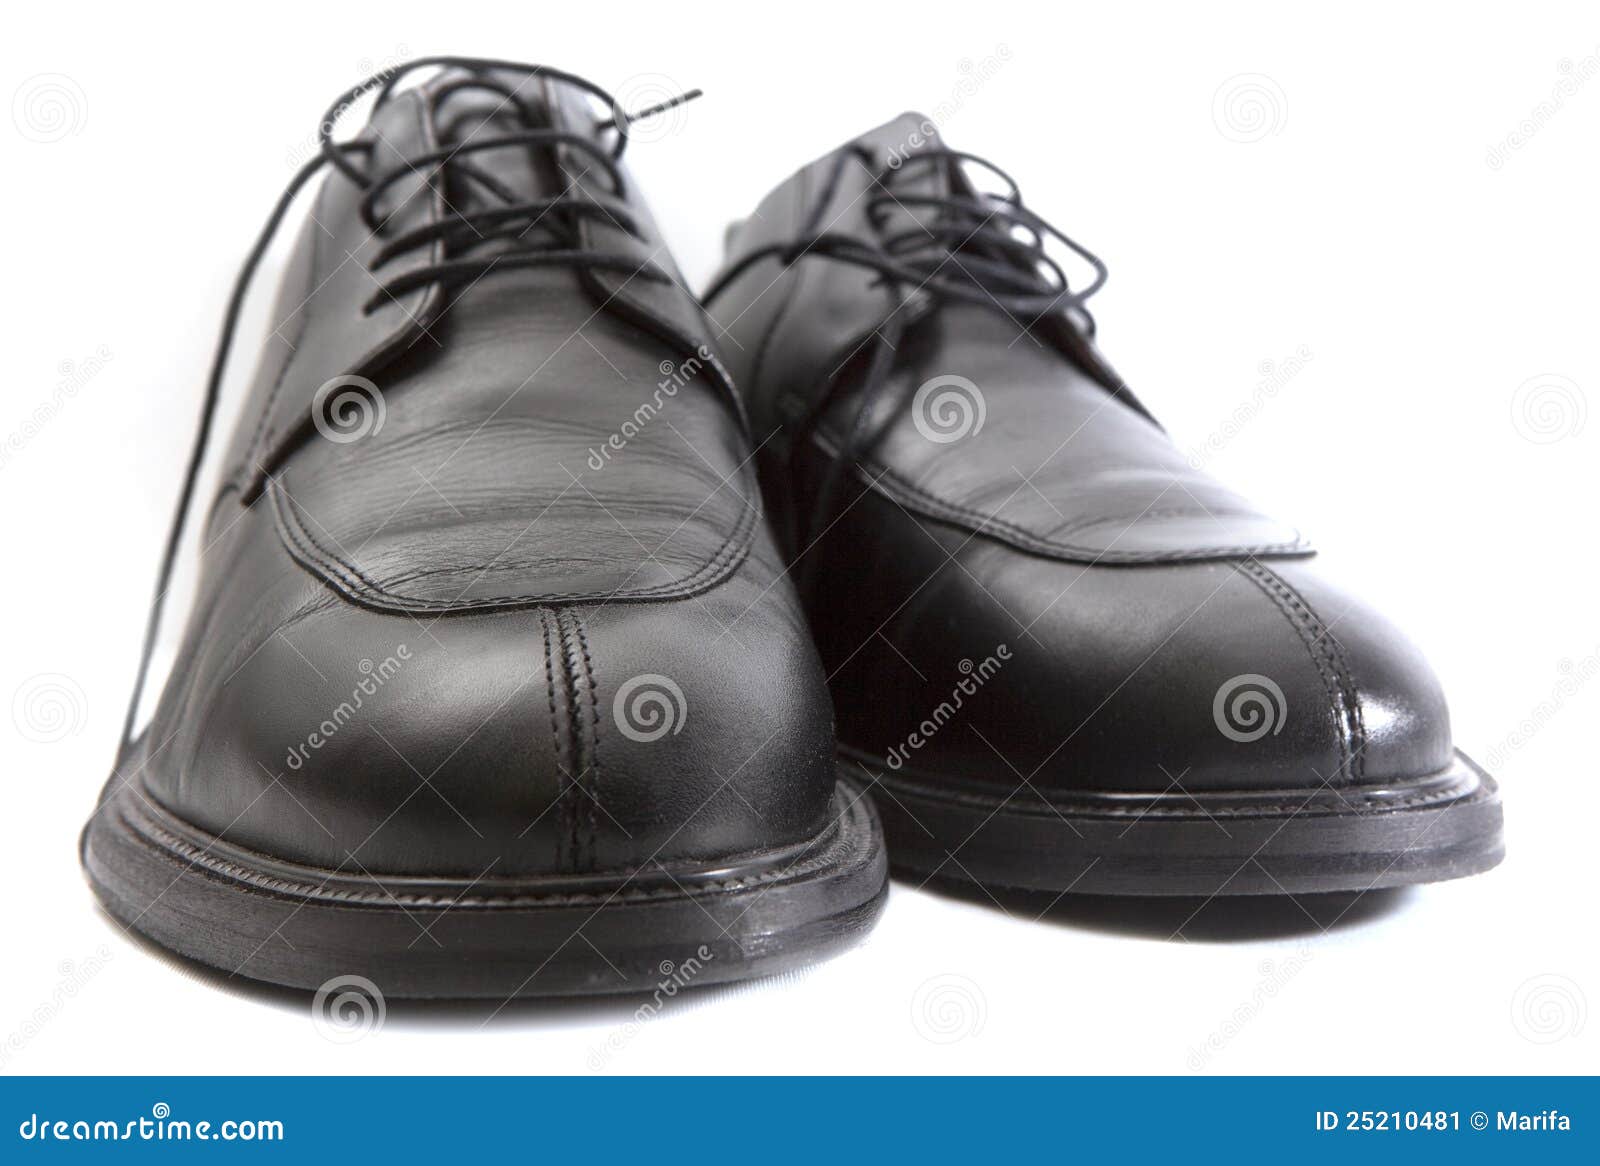 Leather shoes stock image. Image of black, leather, people - 25210481